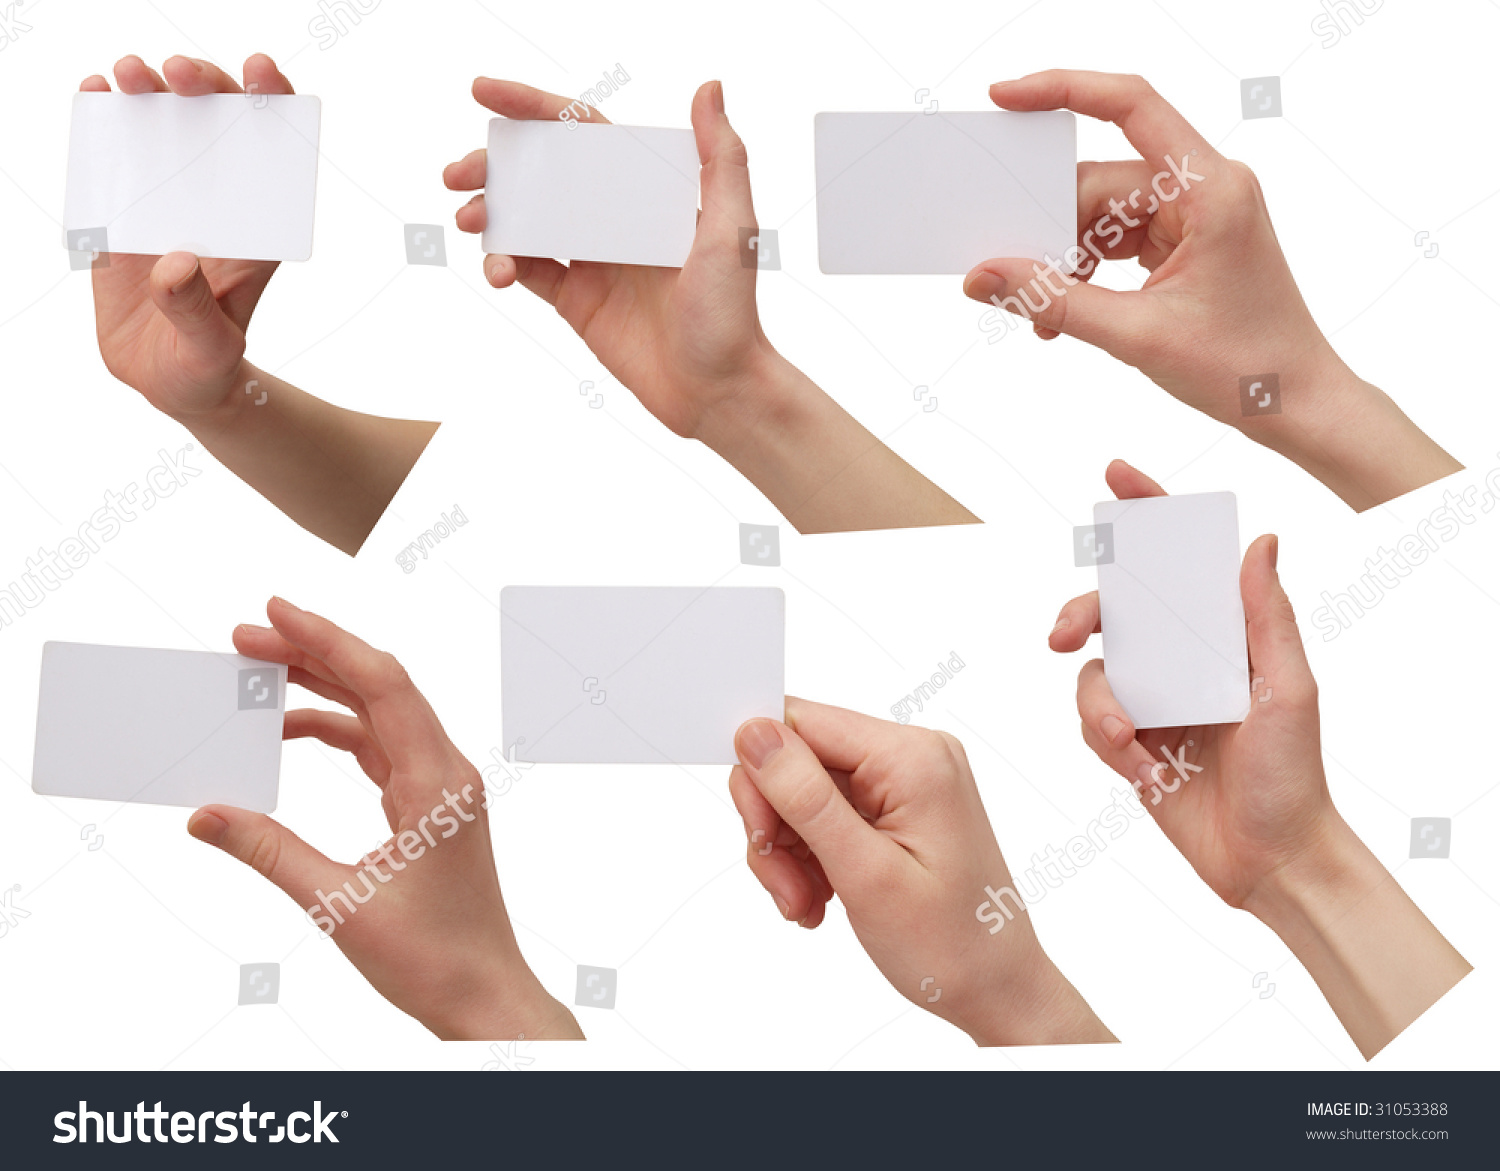 color images of women's hands with a credit card. isolated on a white background #31053388